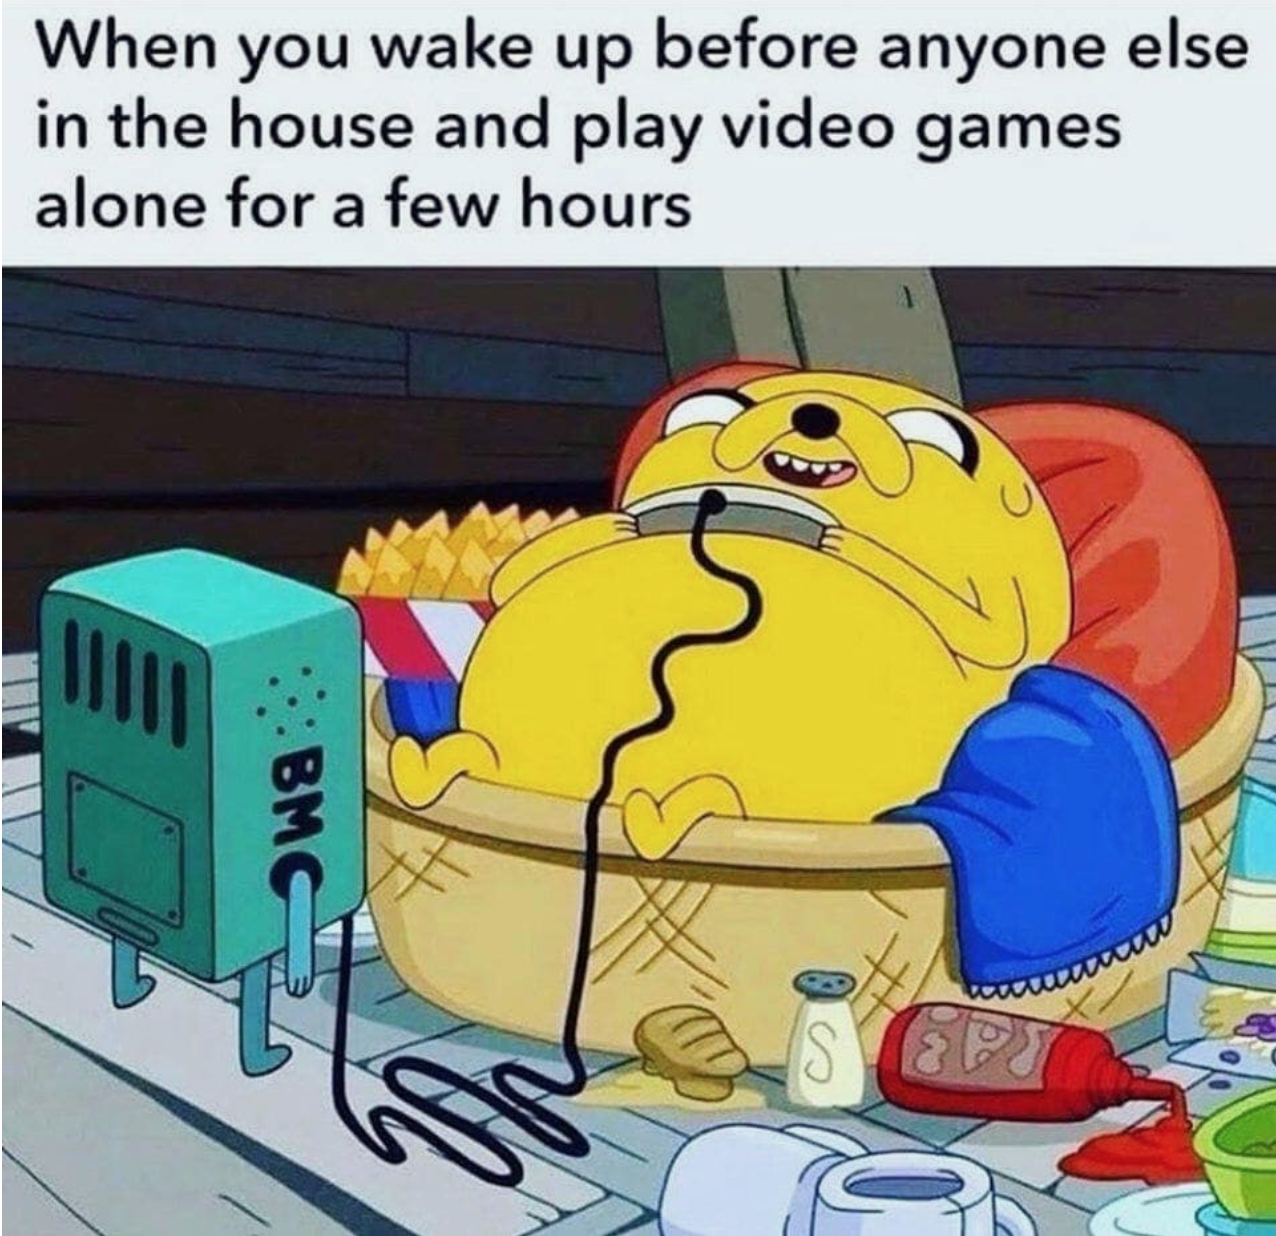 funny video game memes  - When you wake up before anyone else in the house and play video games alone for a few hours Bmc Et was